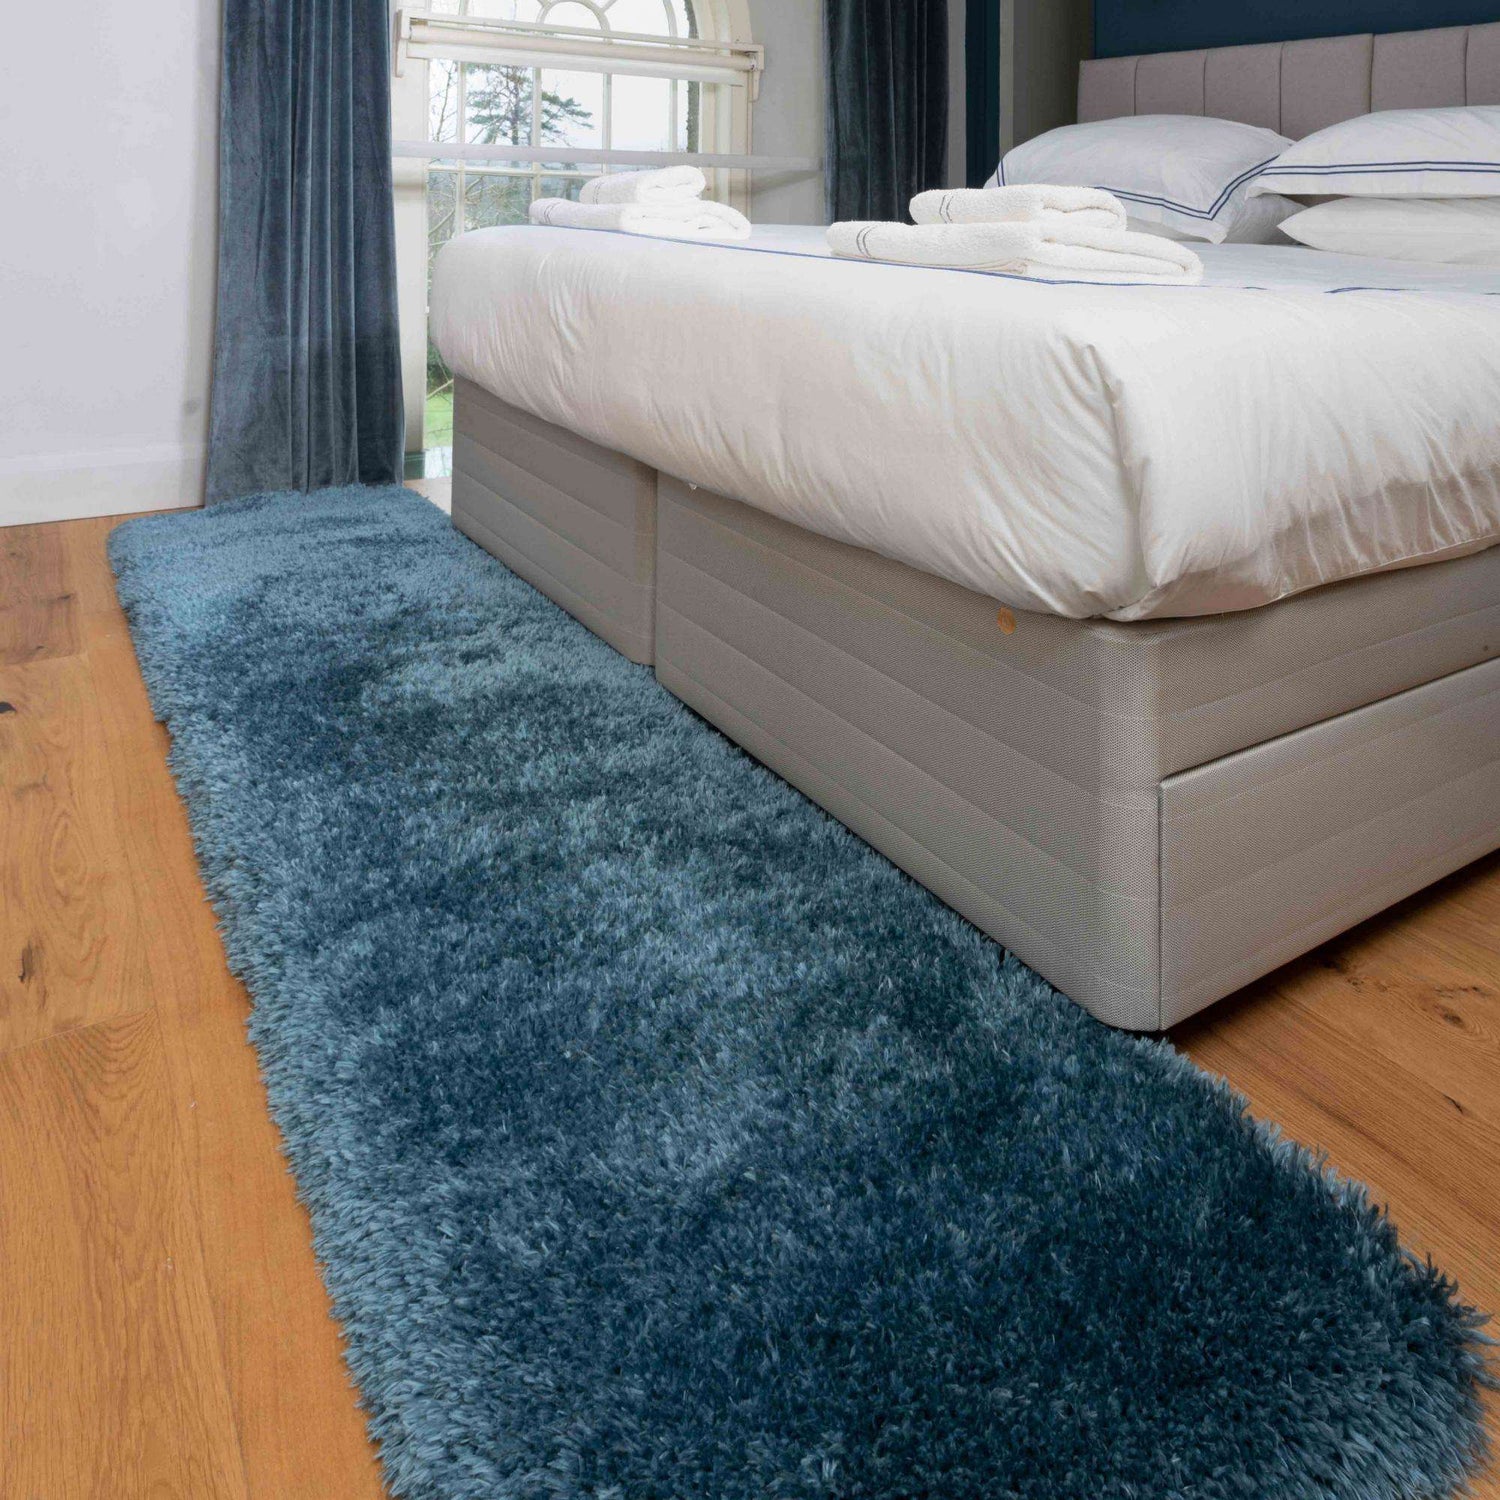 Deluxe Thick Soft Duck Egg Shaggy Bedroom Rug